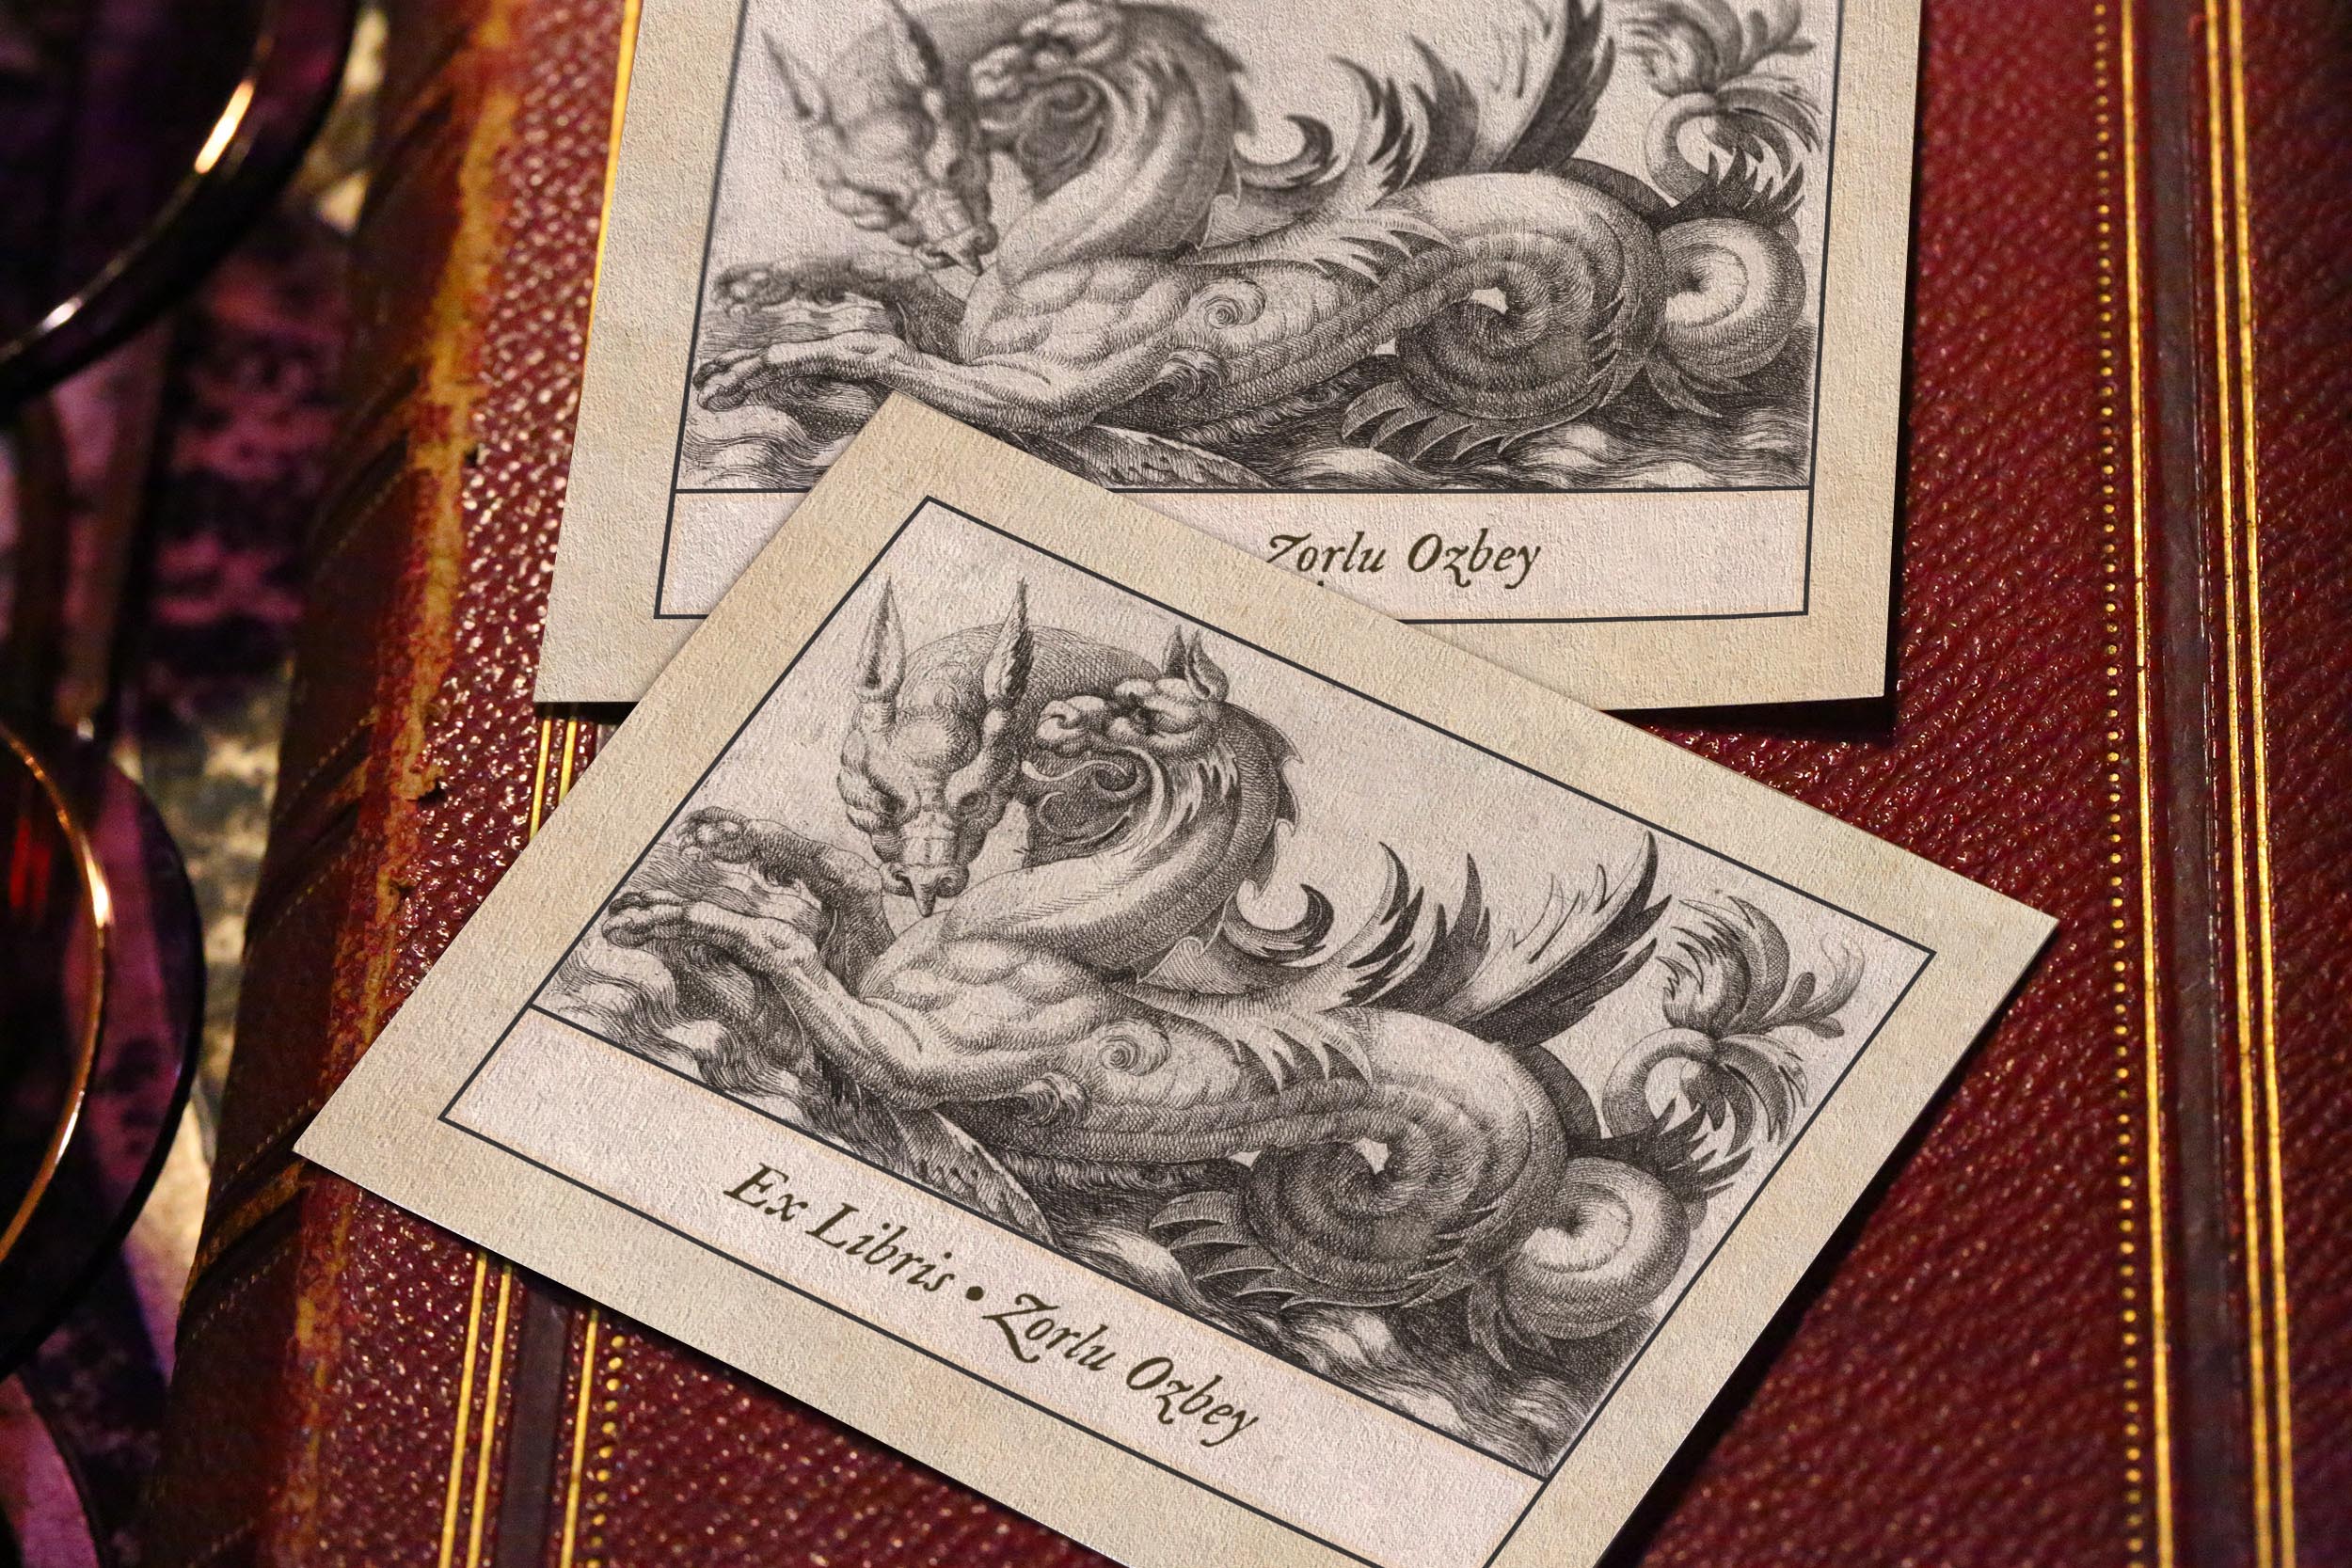 Sea Monsters, Personalized Ex-Libris Bookplates, Crafted on Traditional Gummed Paper, 3.25in x 2.5in, Set of 30